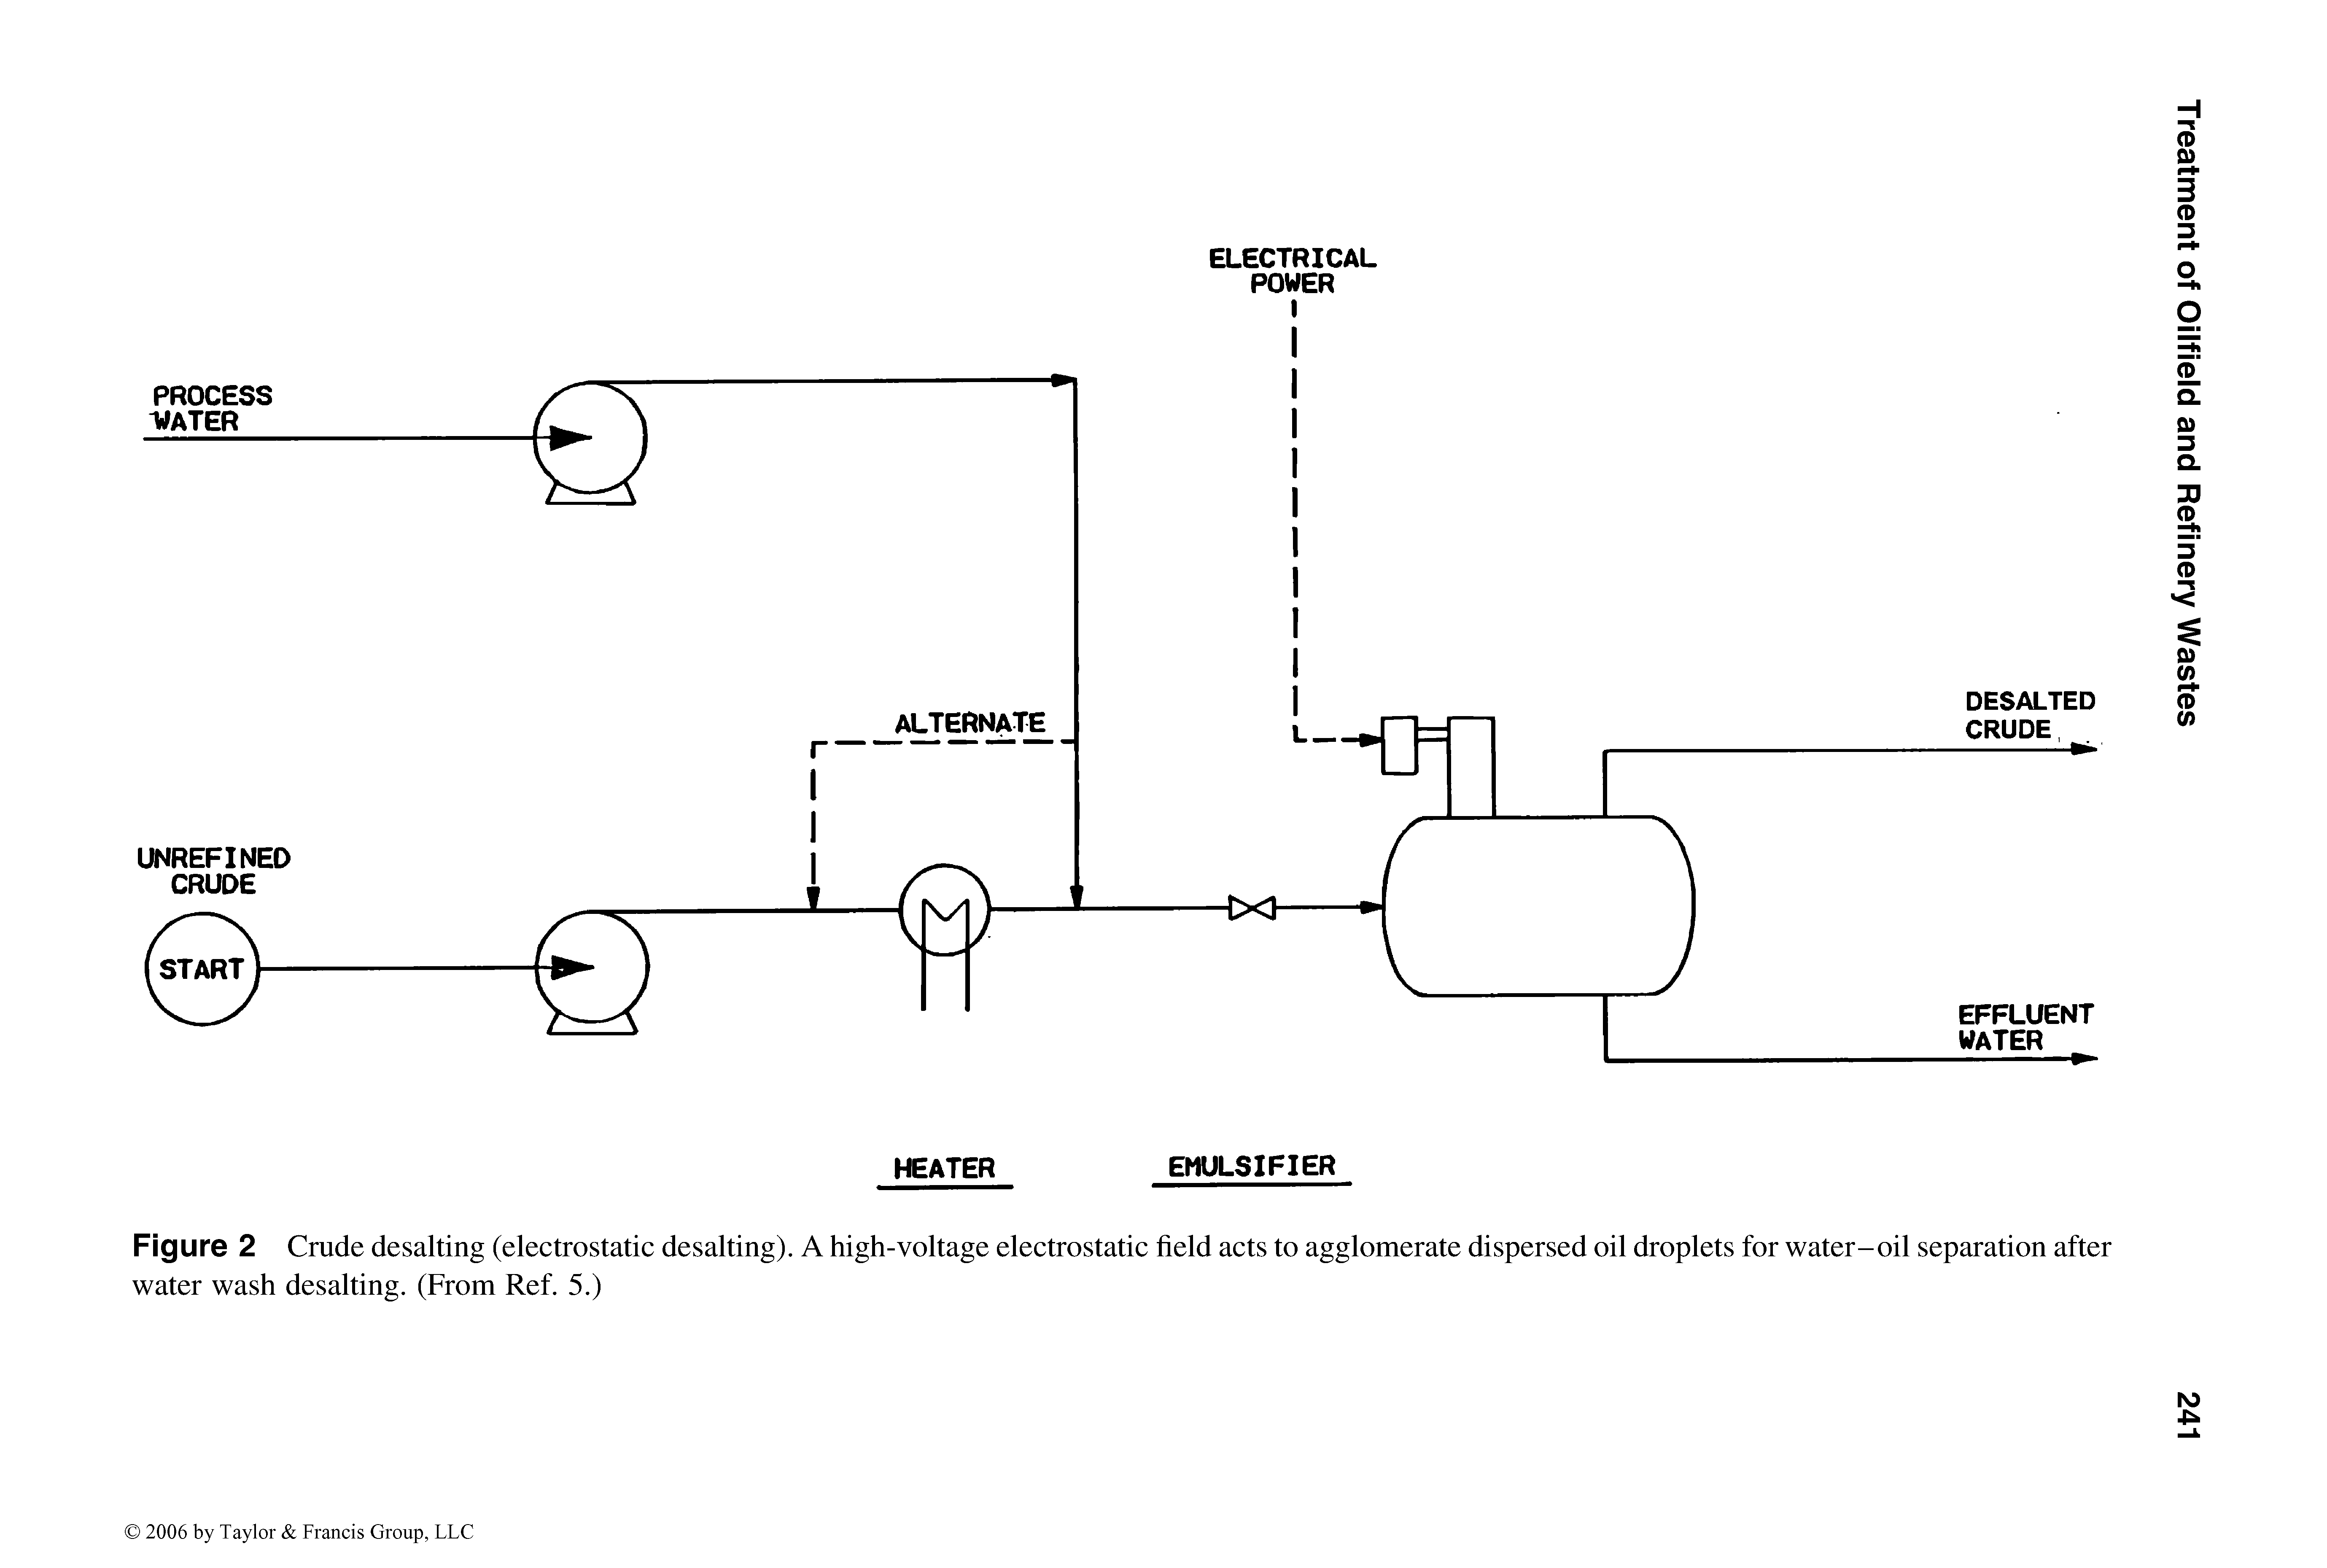 Figure 2 Crude desalting (electrostatic desalting). A high-voltage electrostatic field acts to agglomerate dispersed oil droplets for water-oil separation after water wash desalting. (From Ref. 5.)...